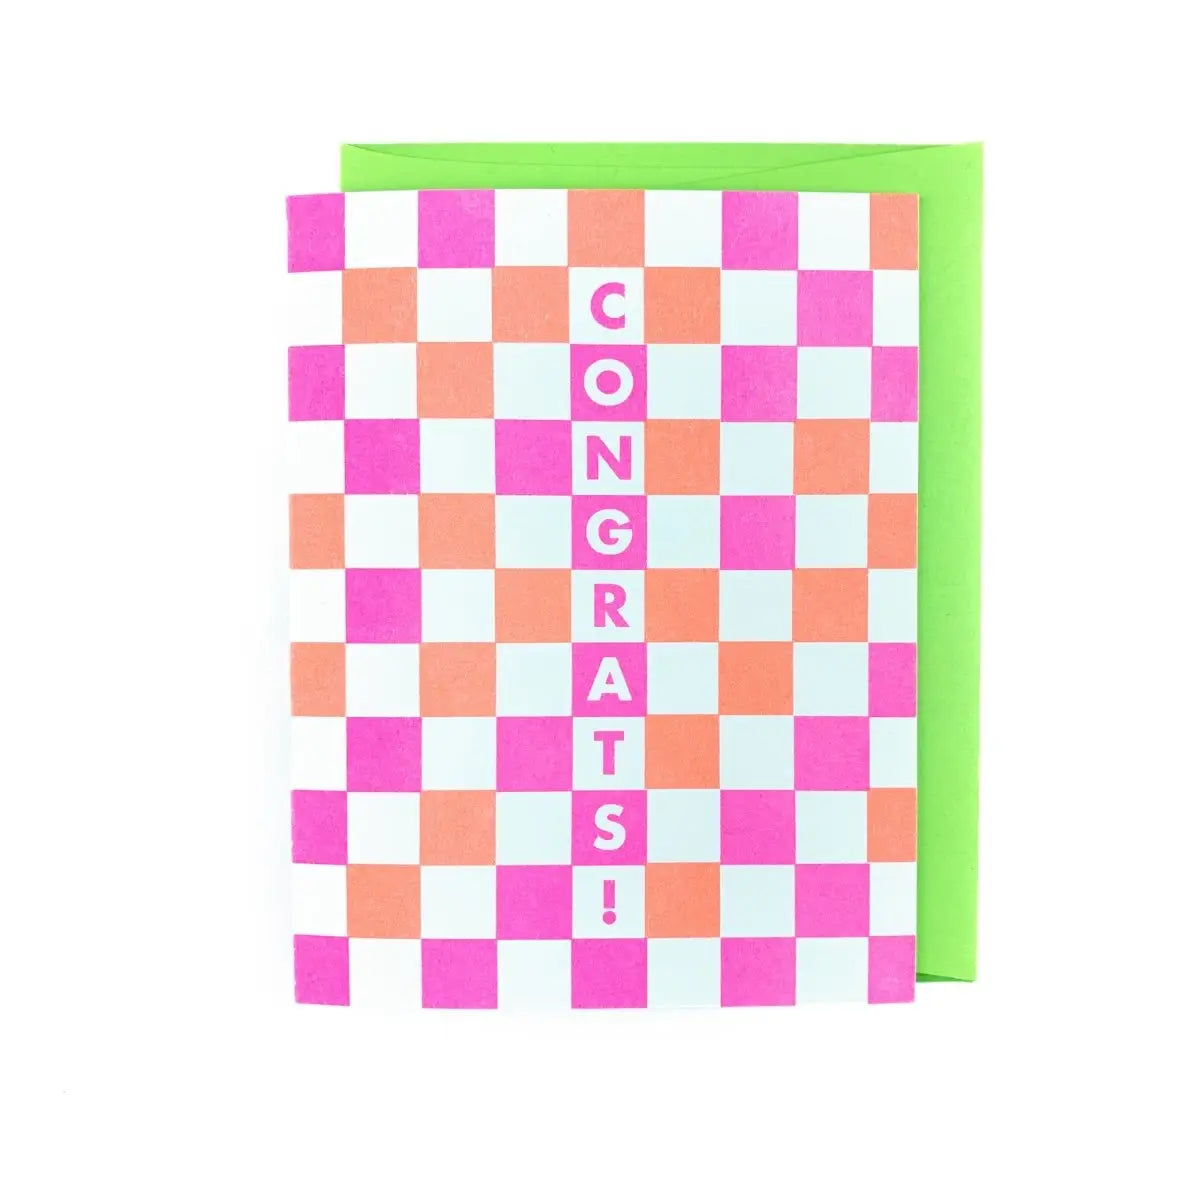 White card with pink and orange checkers. Pink and white text reads "congrats!"